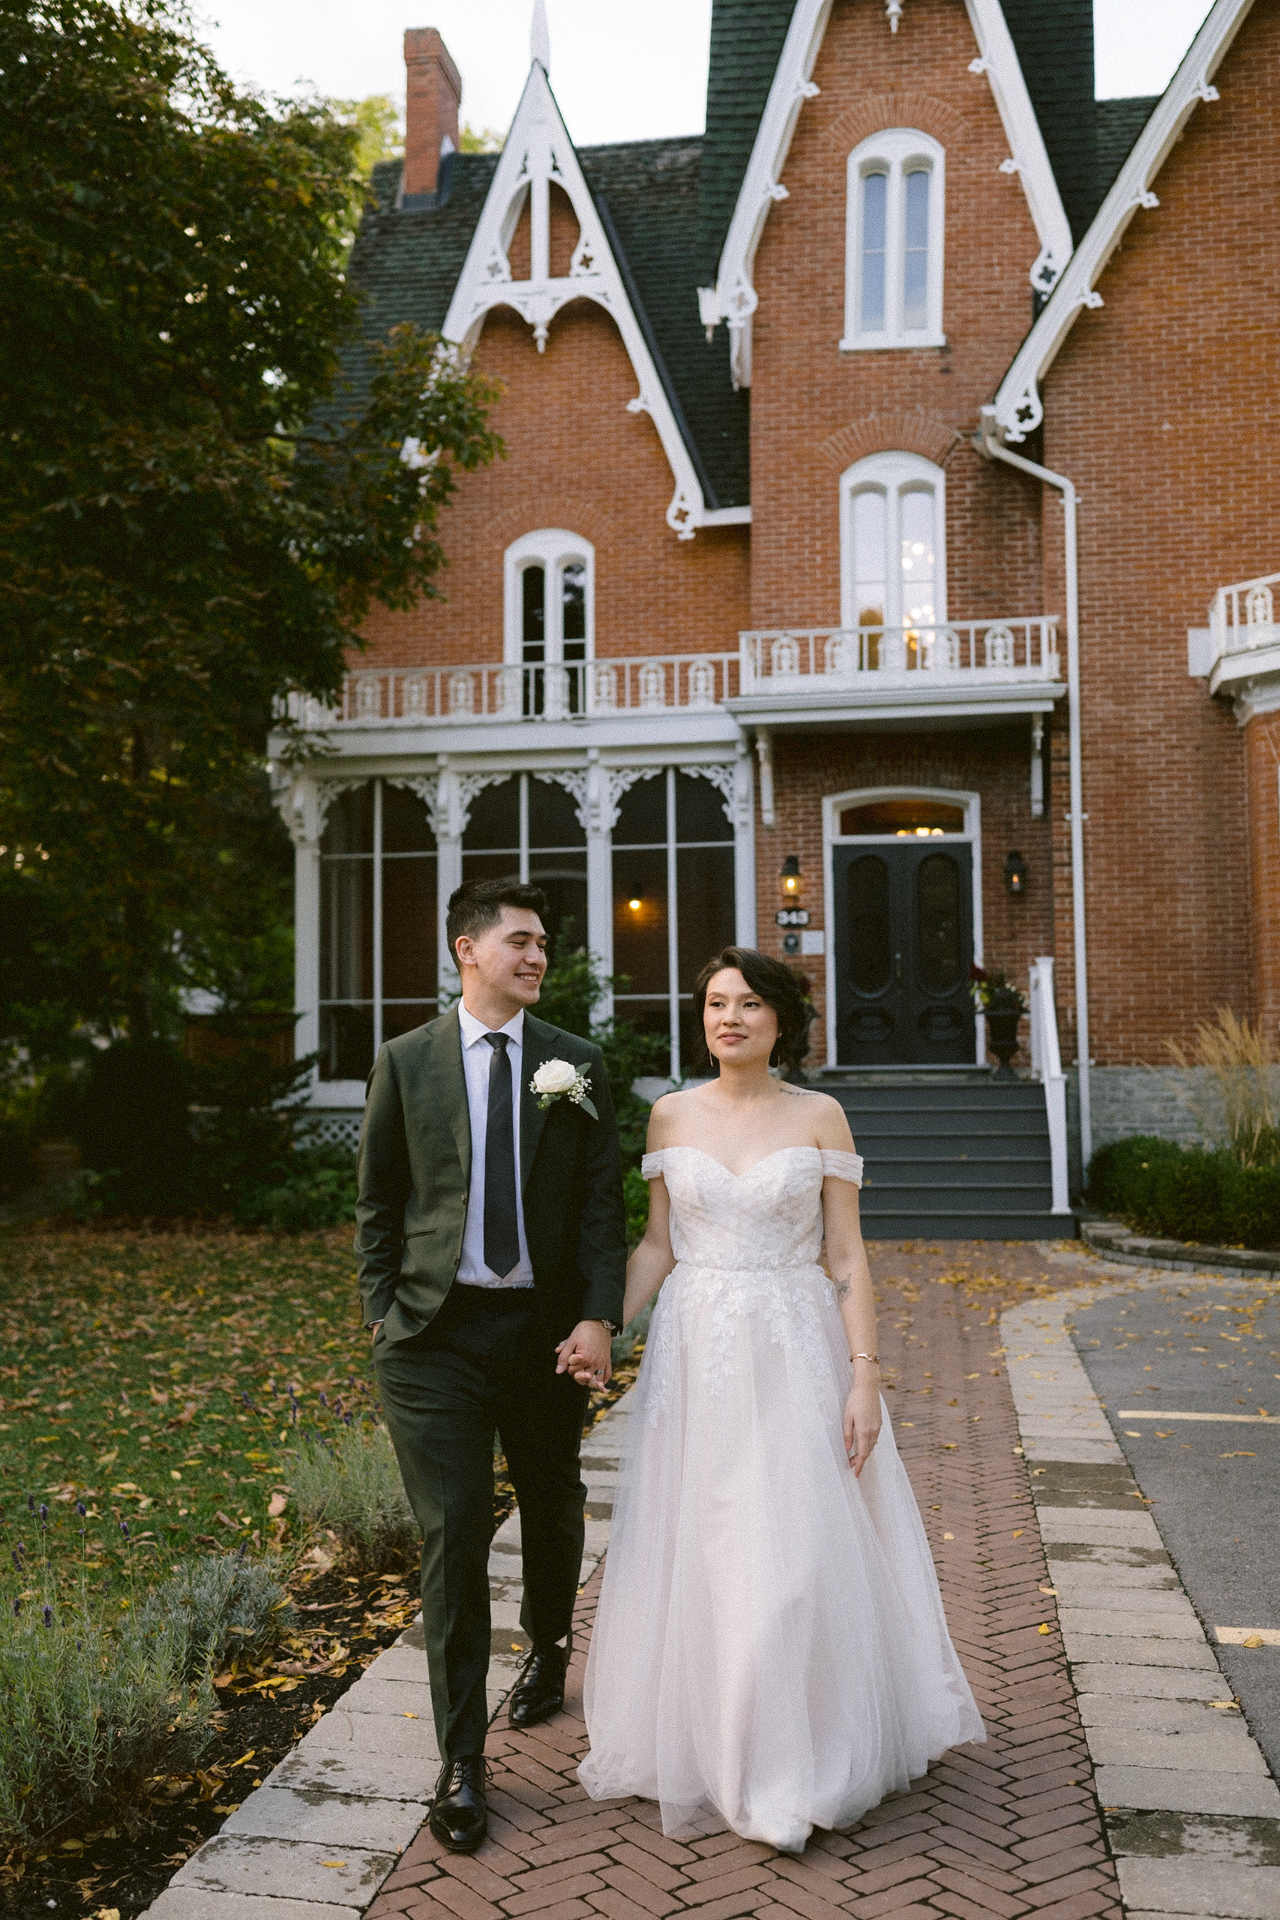 A couple in wedding attire holding hands in front of a victorian-style house